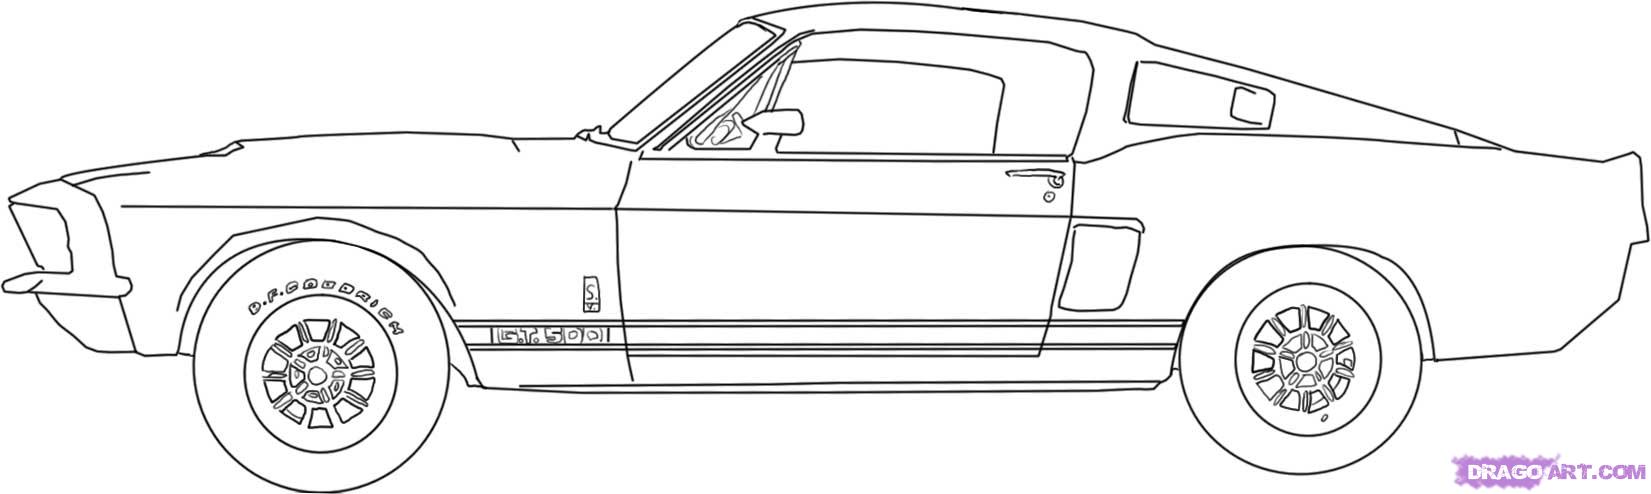 Coloring page: Sports car / Tuning (Transportation) #147119 - Free Printable Coloring Pages